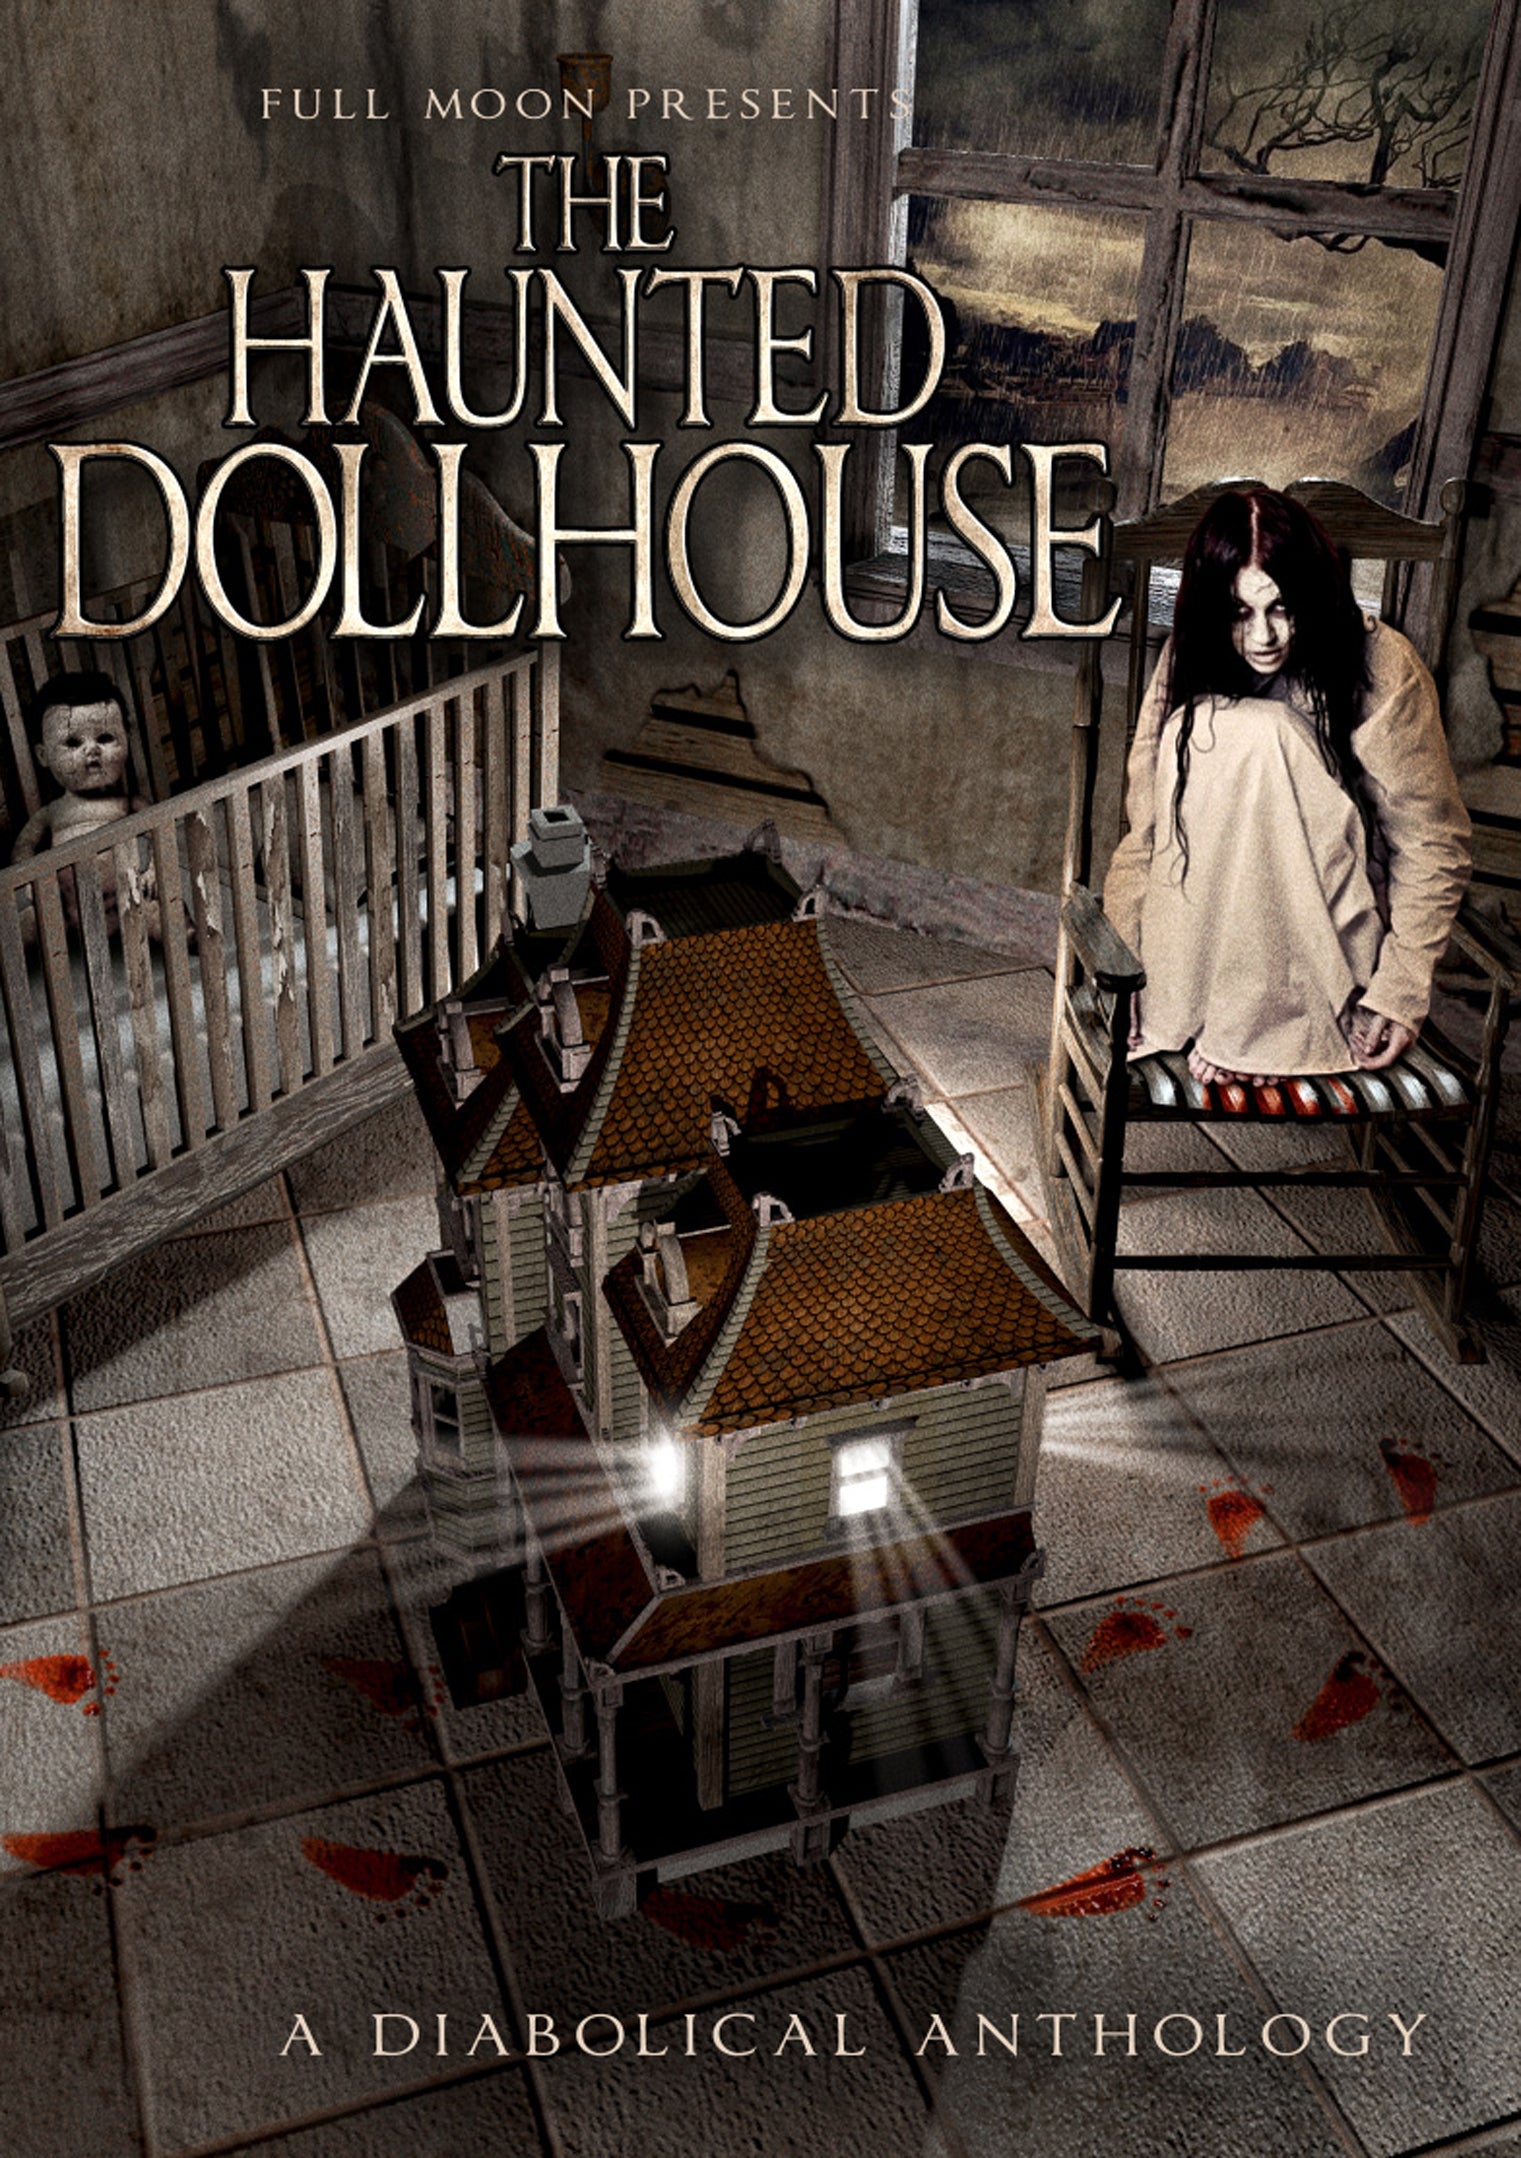 THE HAUNTED DOLLHOUSE DVD